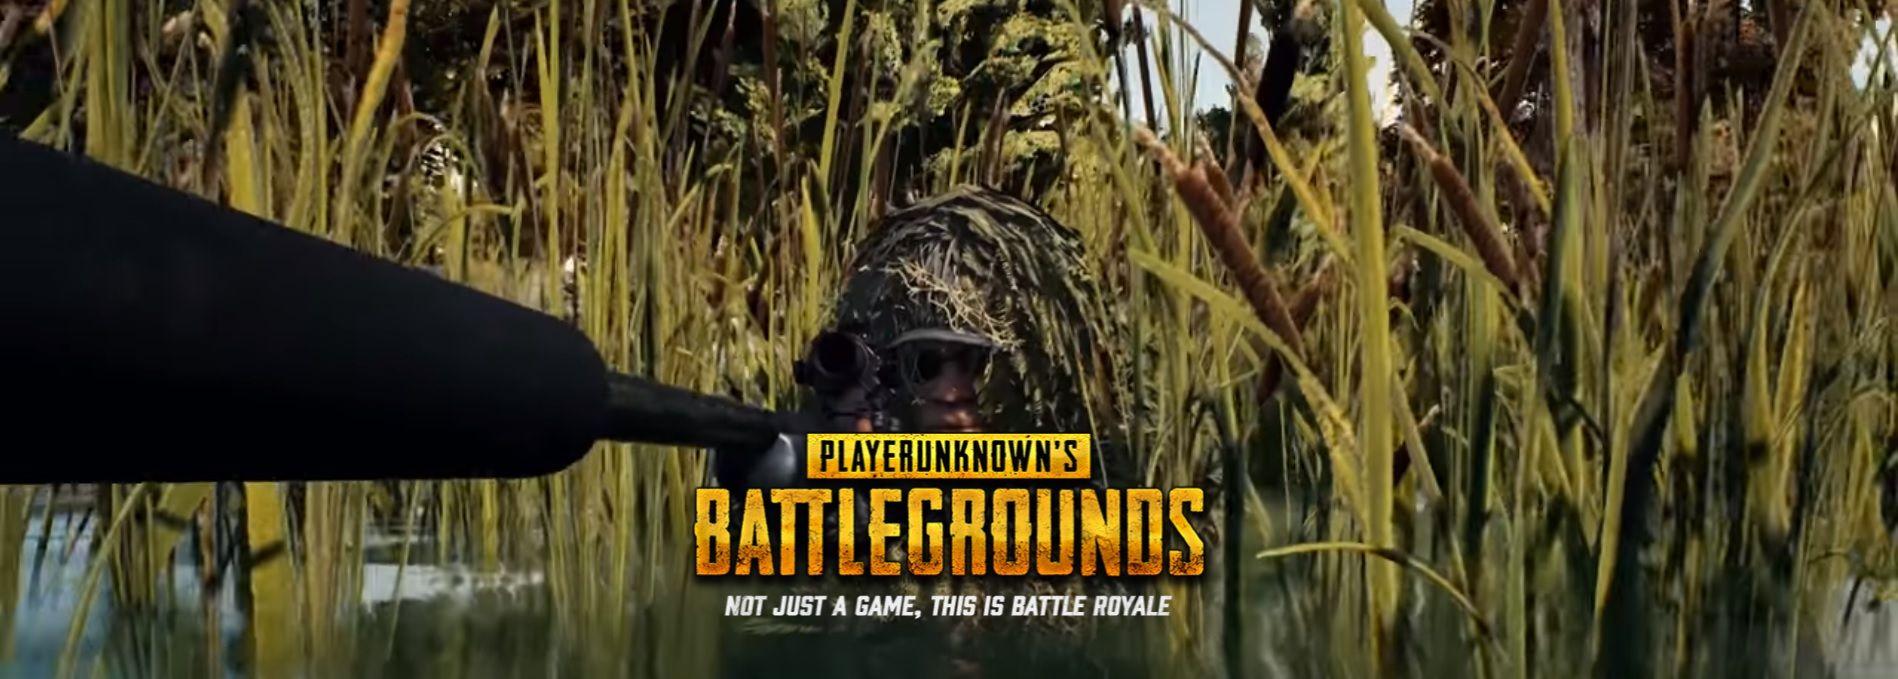 PLAYERUNKNOWN’s BATTLEGROUNDS Review Old Idea, Fresh Take